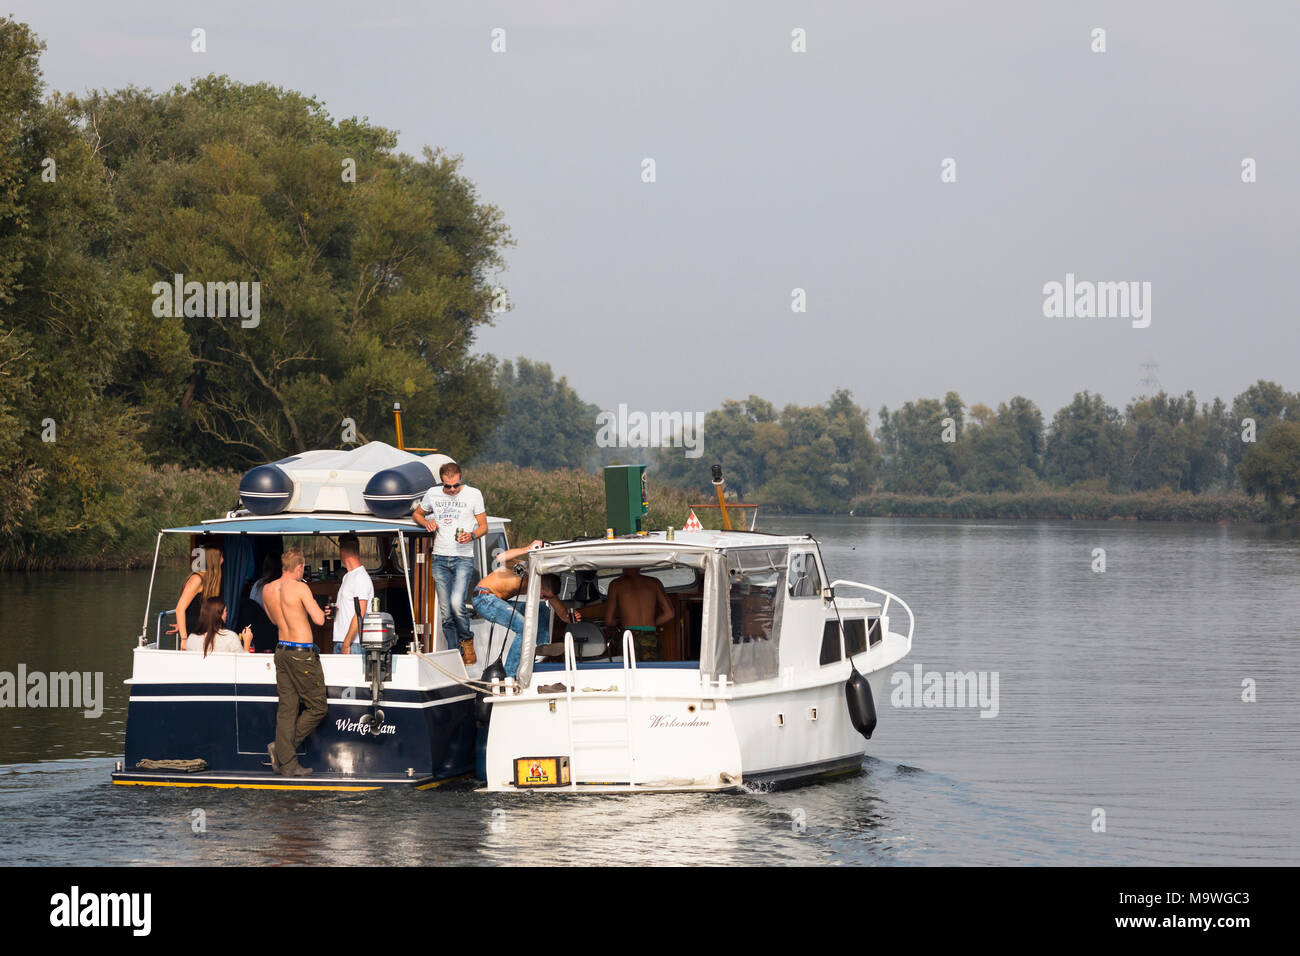 Group of young girls and boys having a party at two yachts at tnational park 'de Biesbosch' in the Netherlands Stock Photo